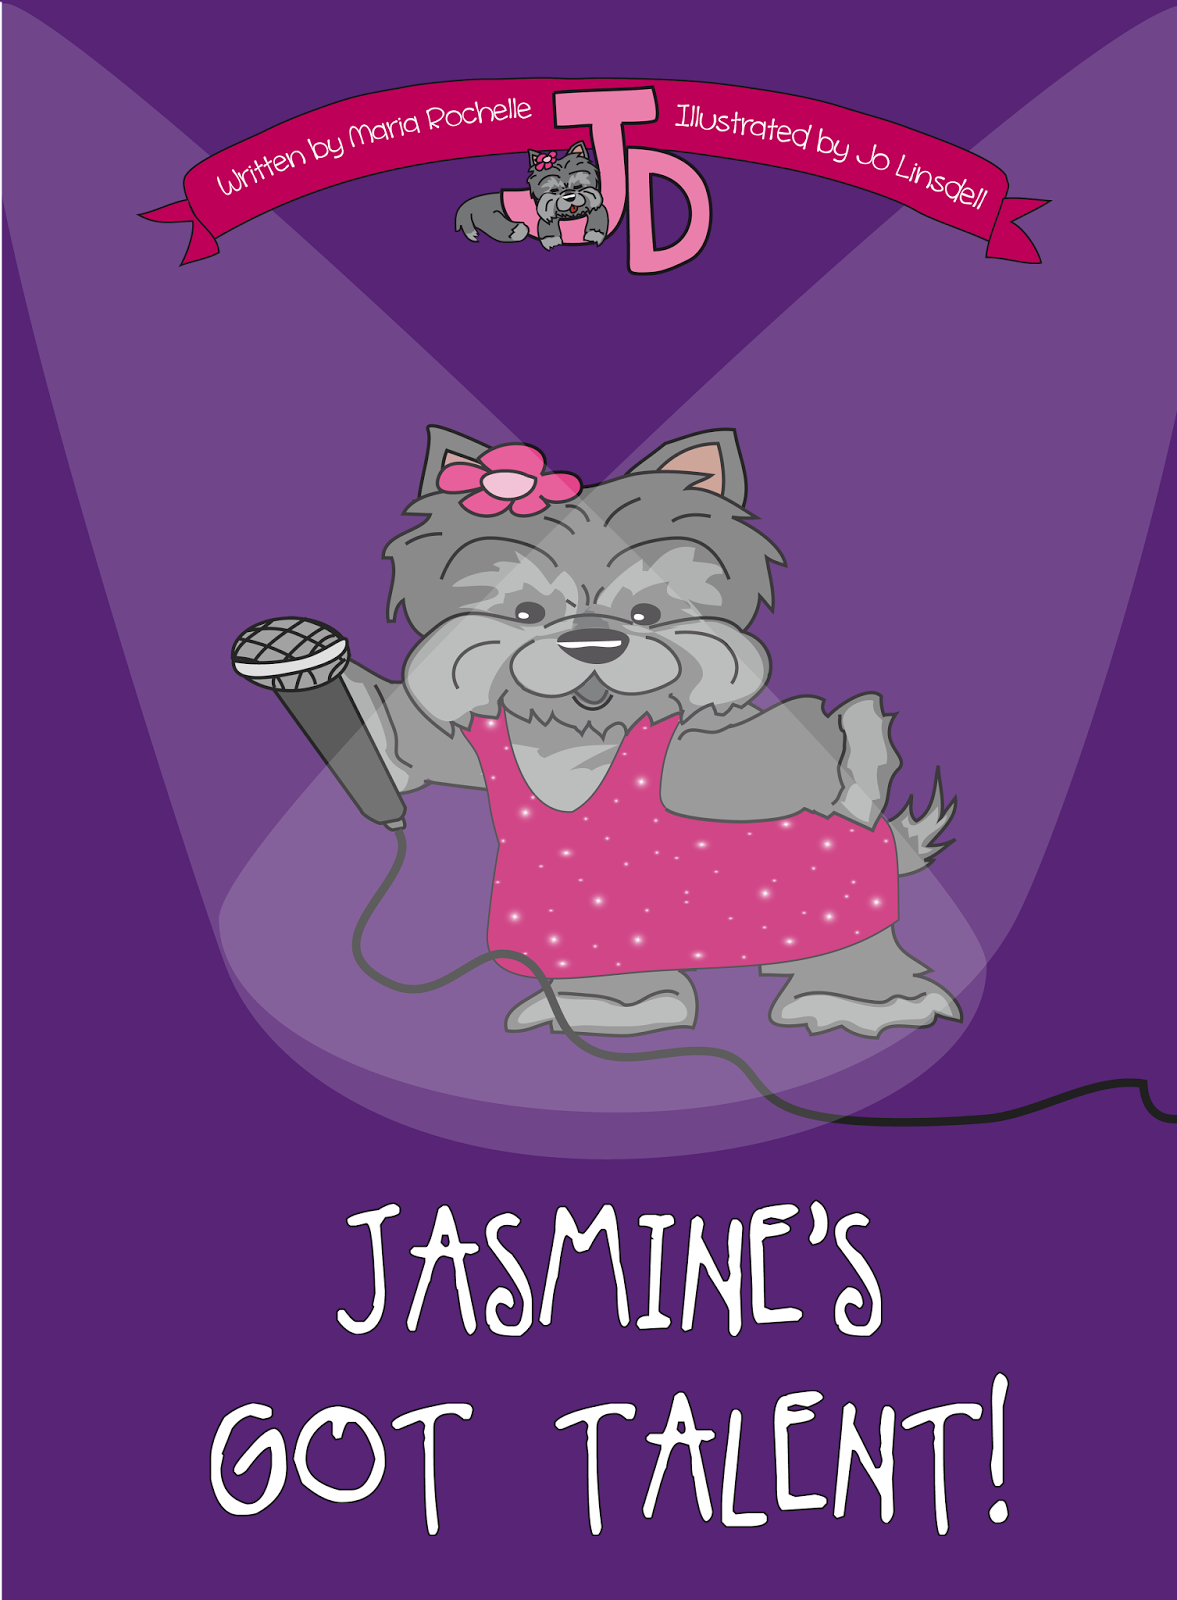 Jasmine's Got Talent! by Maria Rochelle. Illustrated by Jo Linsdell